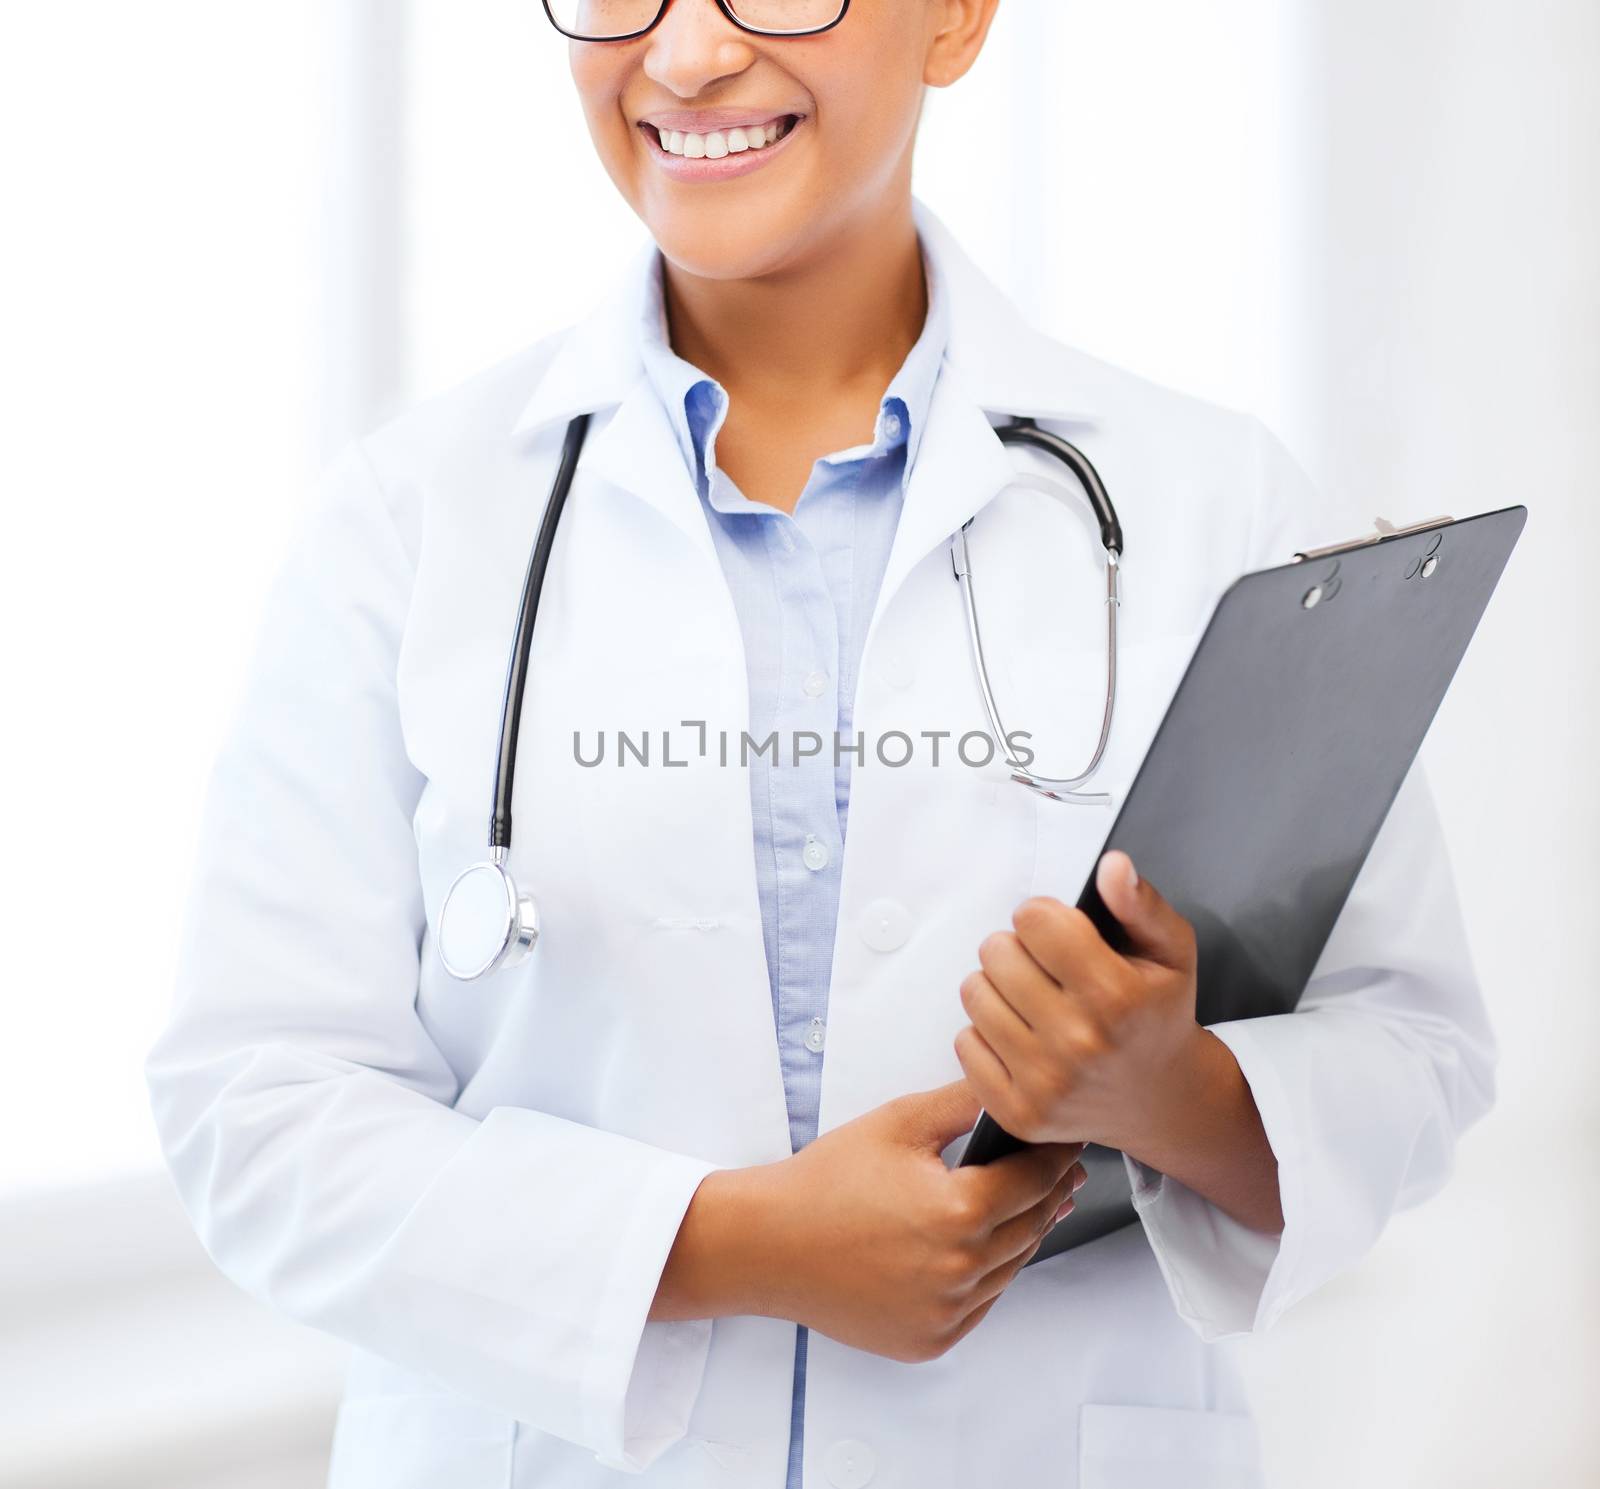 healthcare and medical concept - smiling african female doctor in hospital